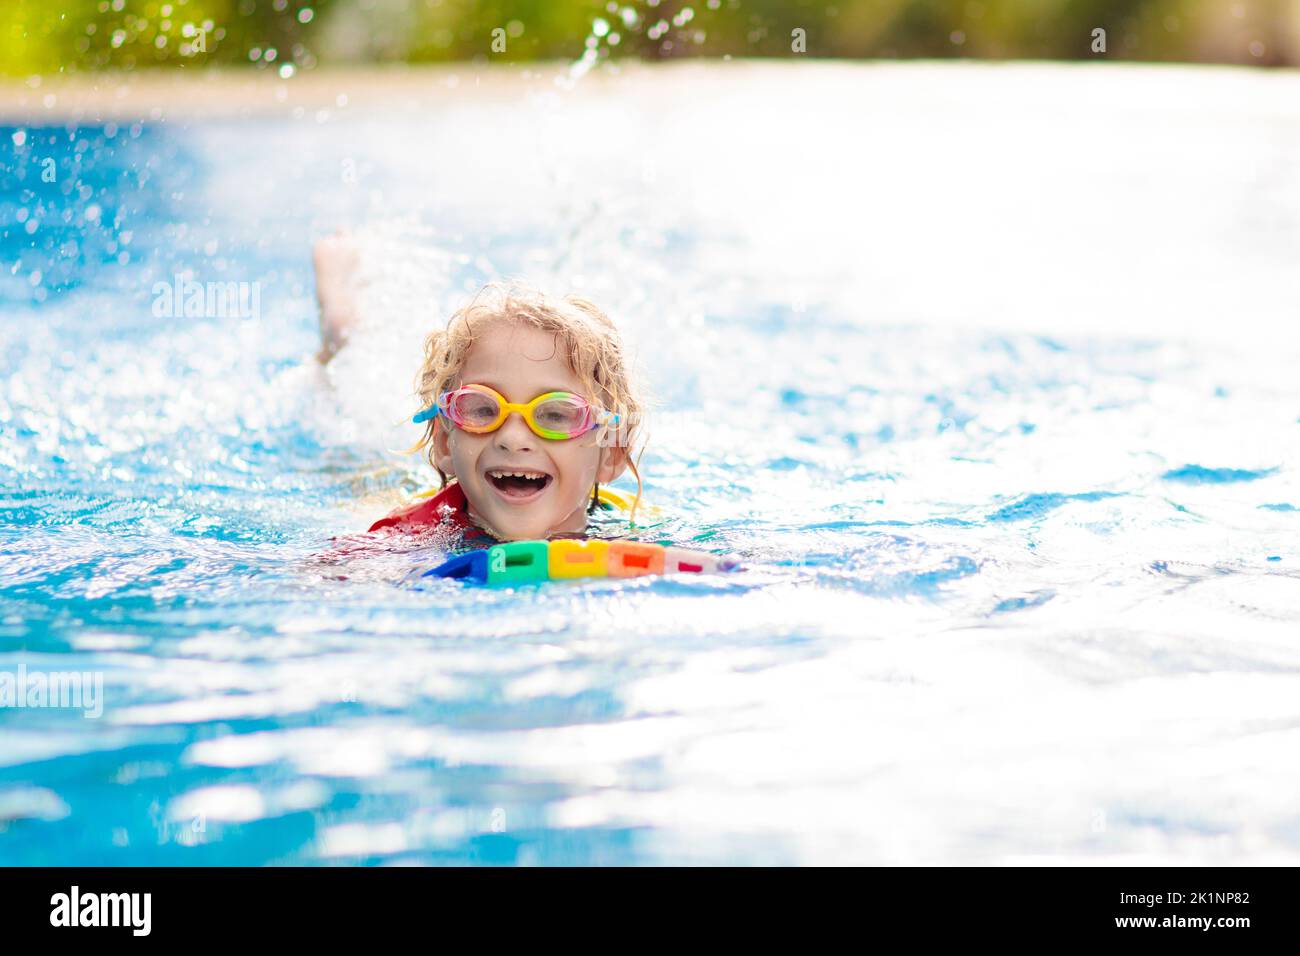 Child learning to swim in outdoor pool of tropical resort. Kids learn swimming. Exercise and training for young children. Little boy with colorful flo Stock Photo